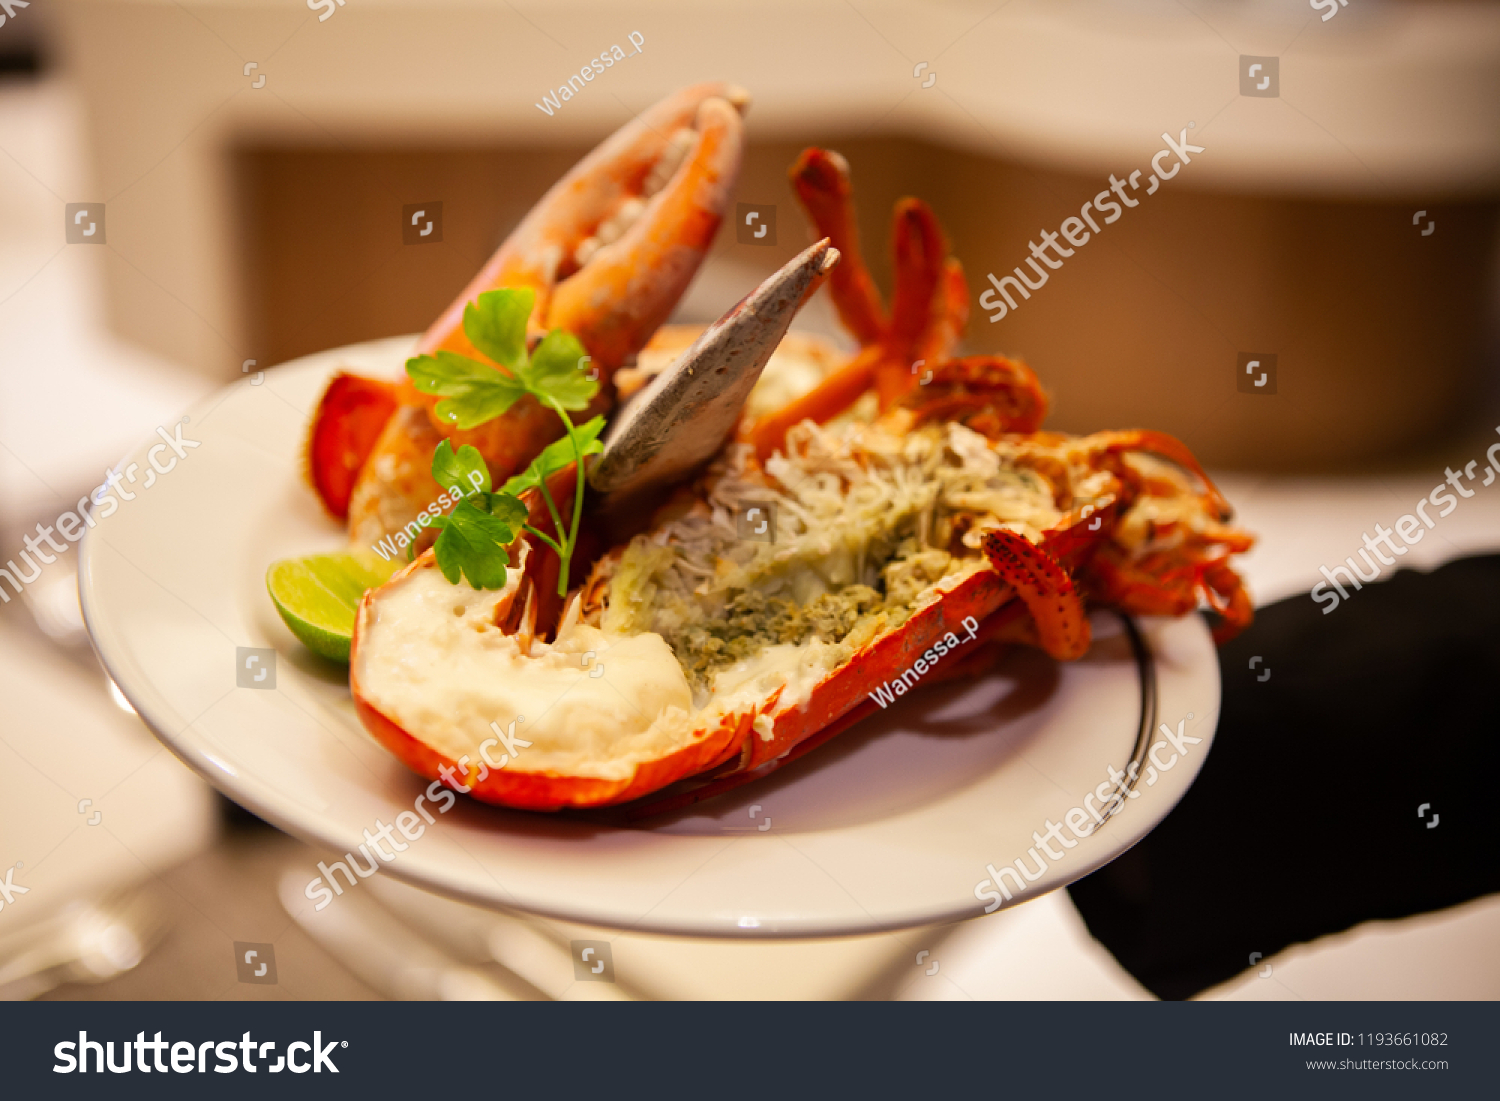 Simple yet delicious. Hot and freshly baked halved Lobster with butter. Fresh, juicy, tasty and flavorful bright red Maine Lobster or American lobster on a hand of waitperson, ready to be served. #1193661082